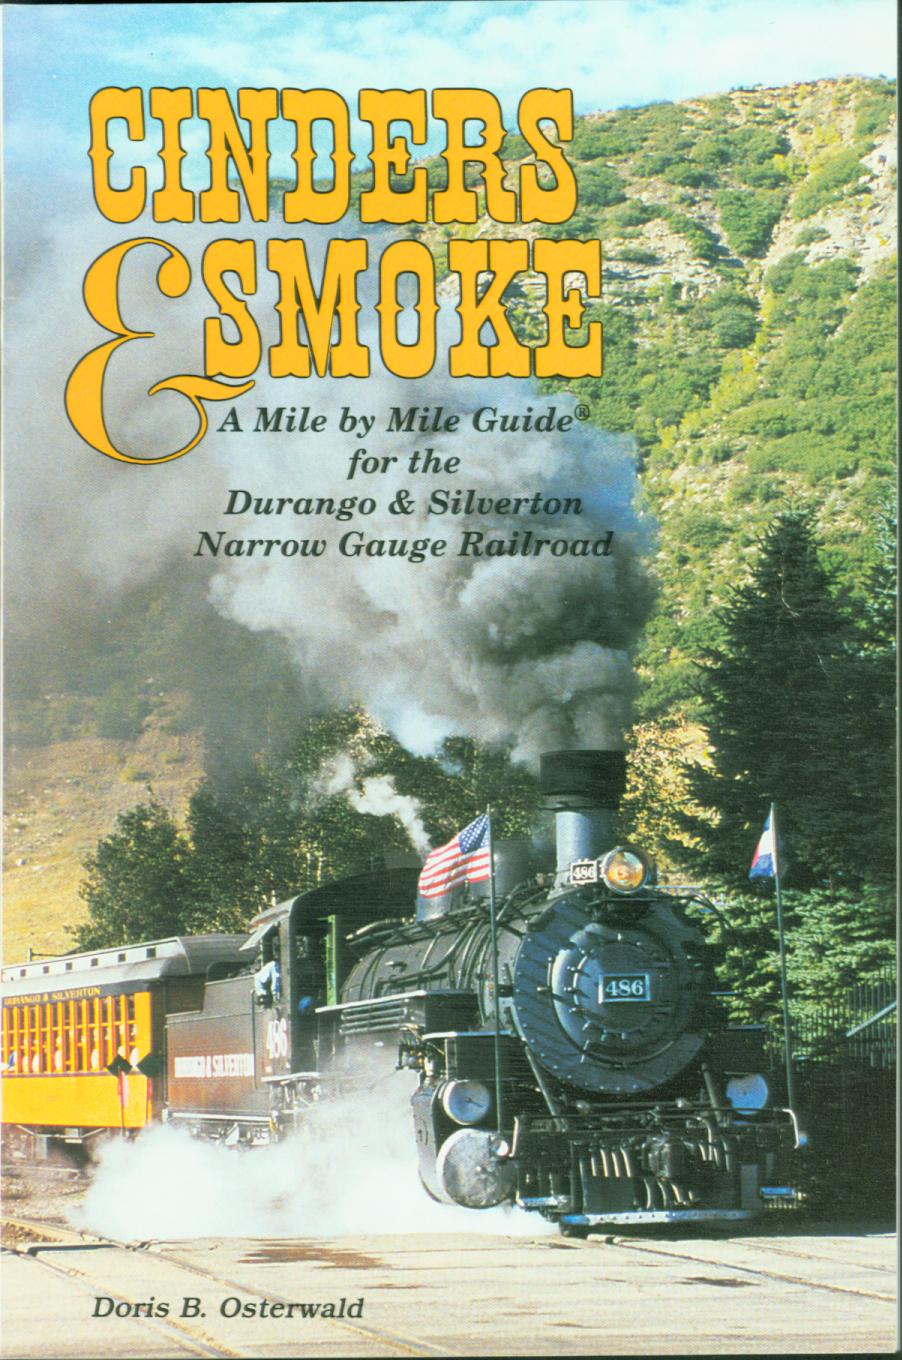 CINDERS & SMOKE: a mile by mile guide for the Durango & Silverton Narrow Gauge Railroad.